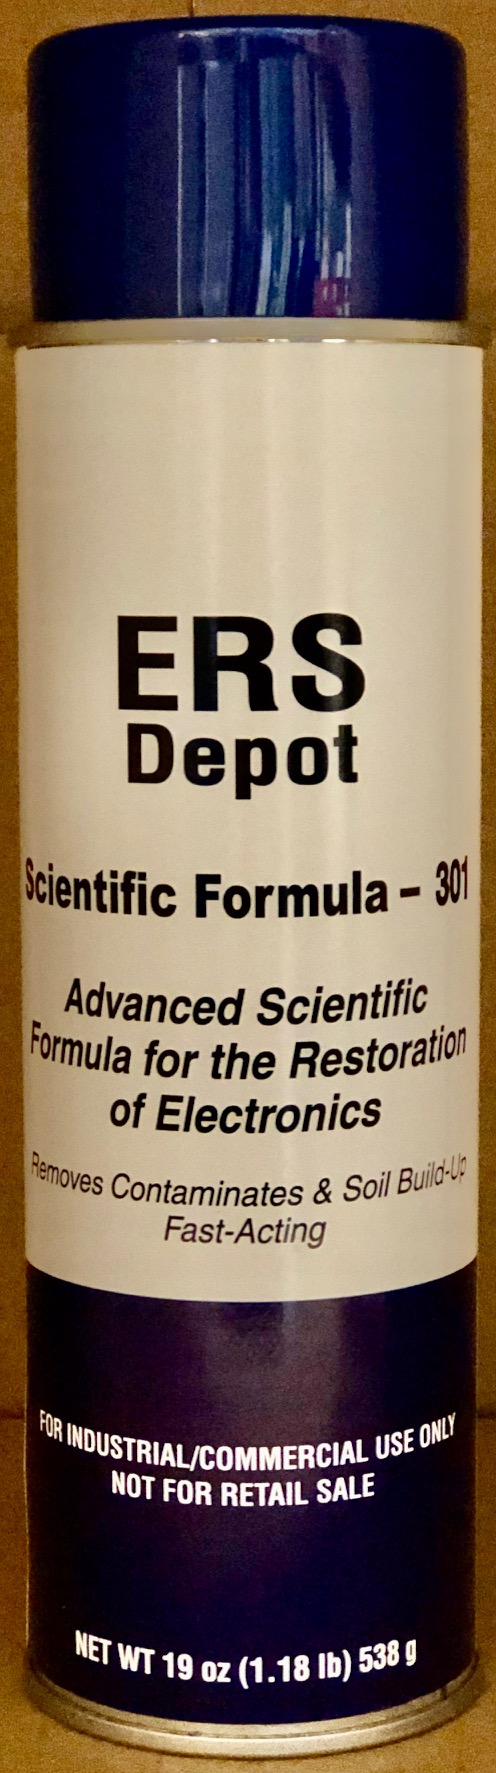 ERS Formula 301 with BLUE LID (case of 12 aerosol cans)